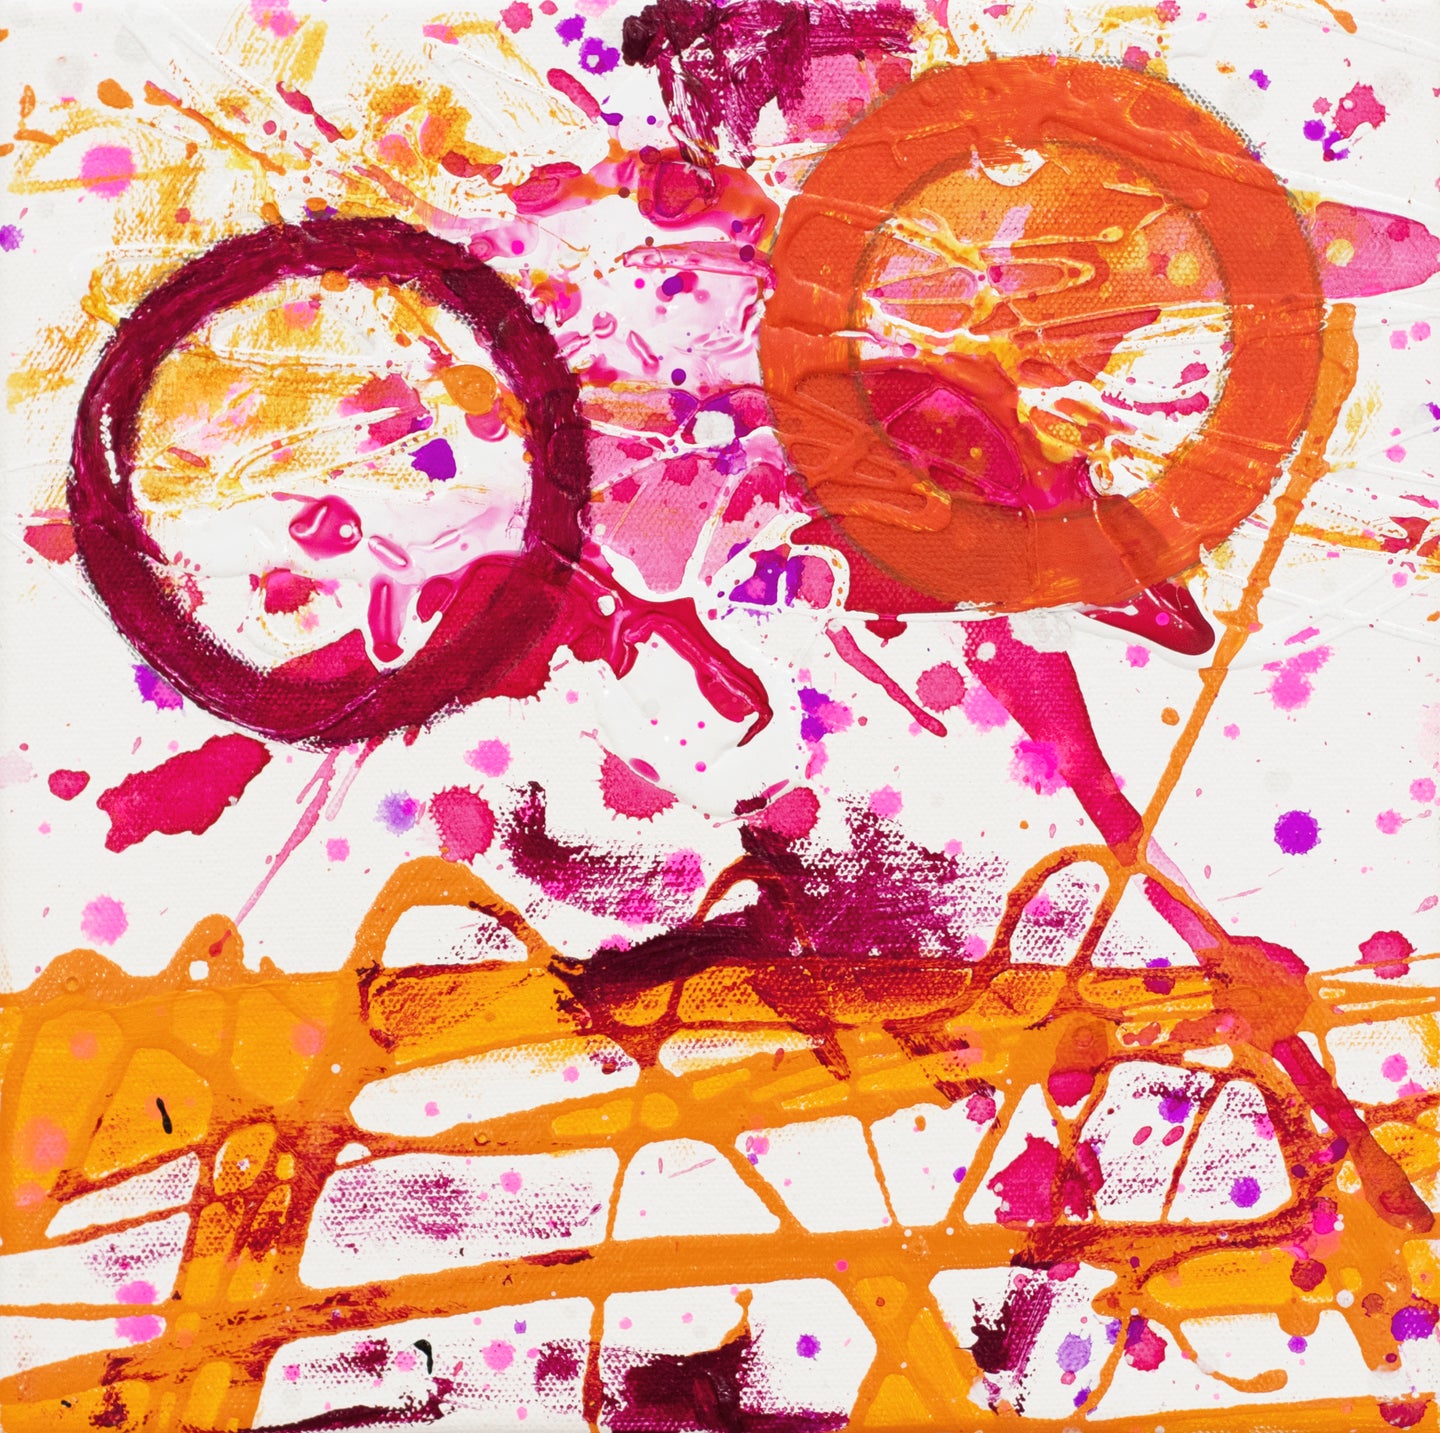 J. Steven Manolis, Flamingo 10.10.03, 2020, acrylic and latex painting on canvas, 10 x 10 inches, Flamingo Art, Abstract expressionism art for sale at Manolis Projects Art Gallery, Miami, Fl